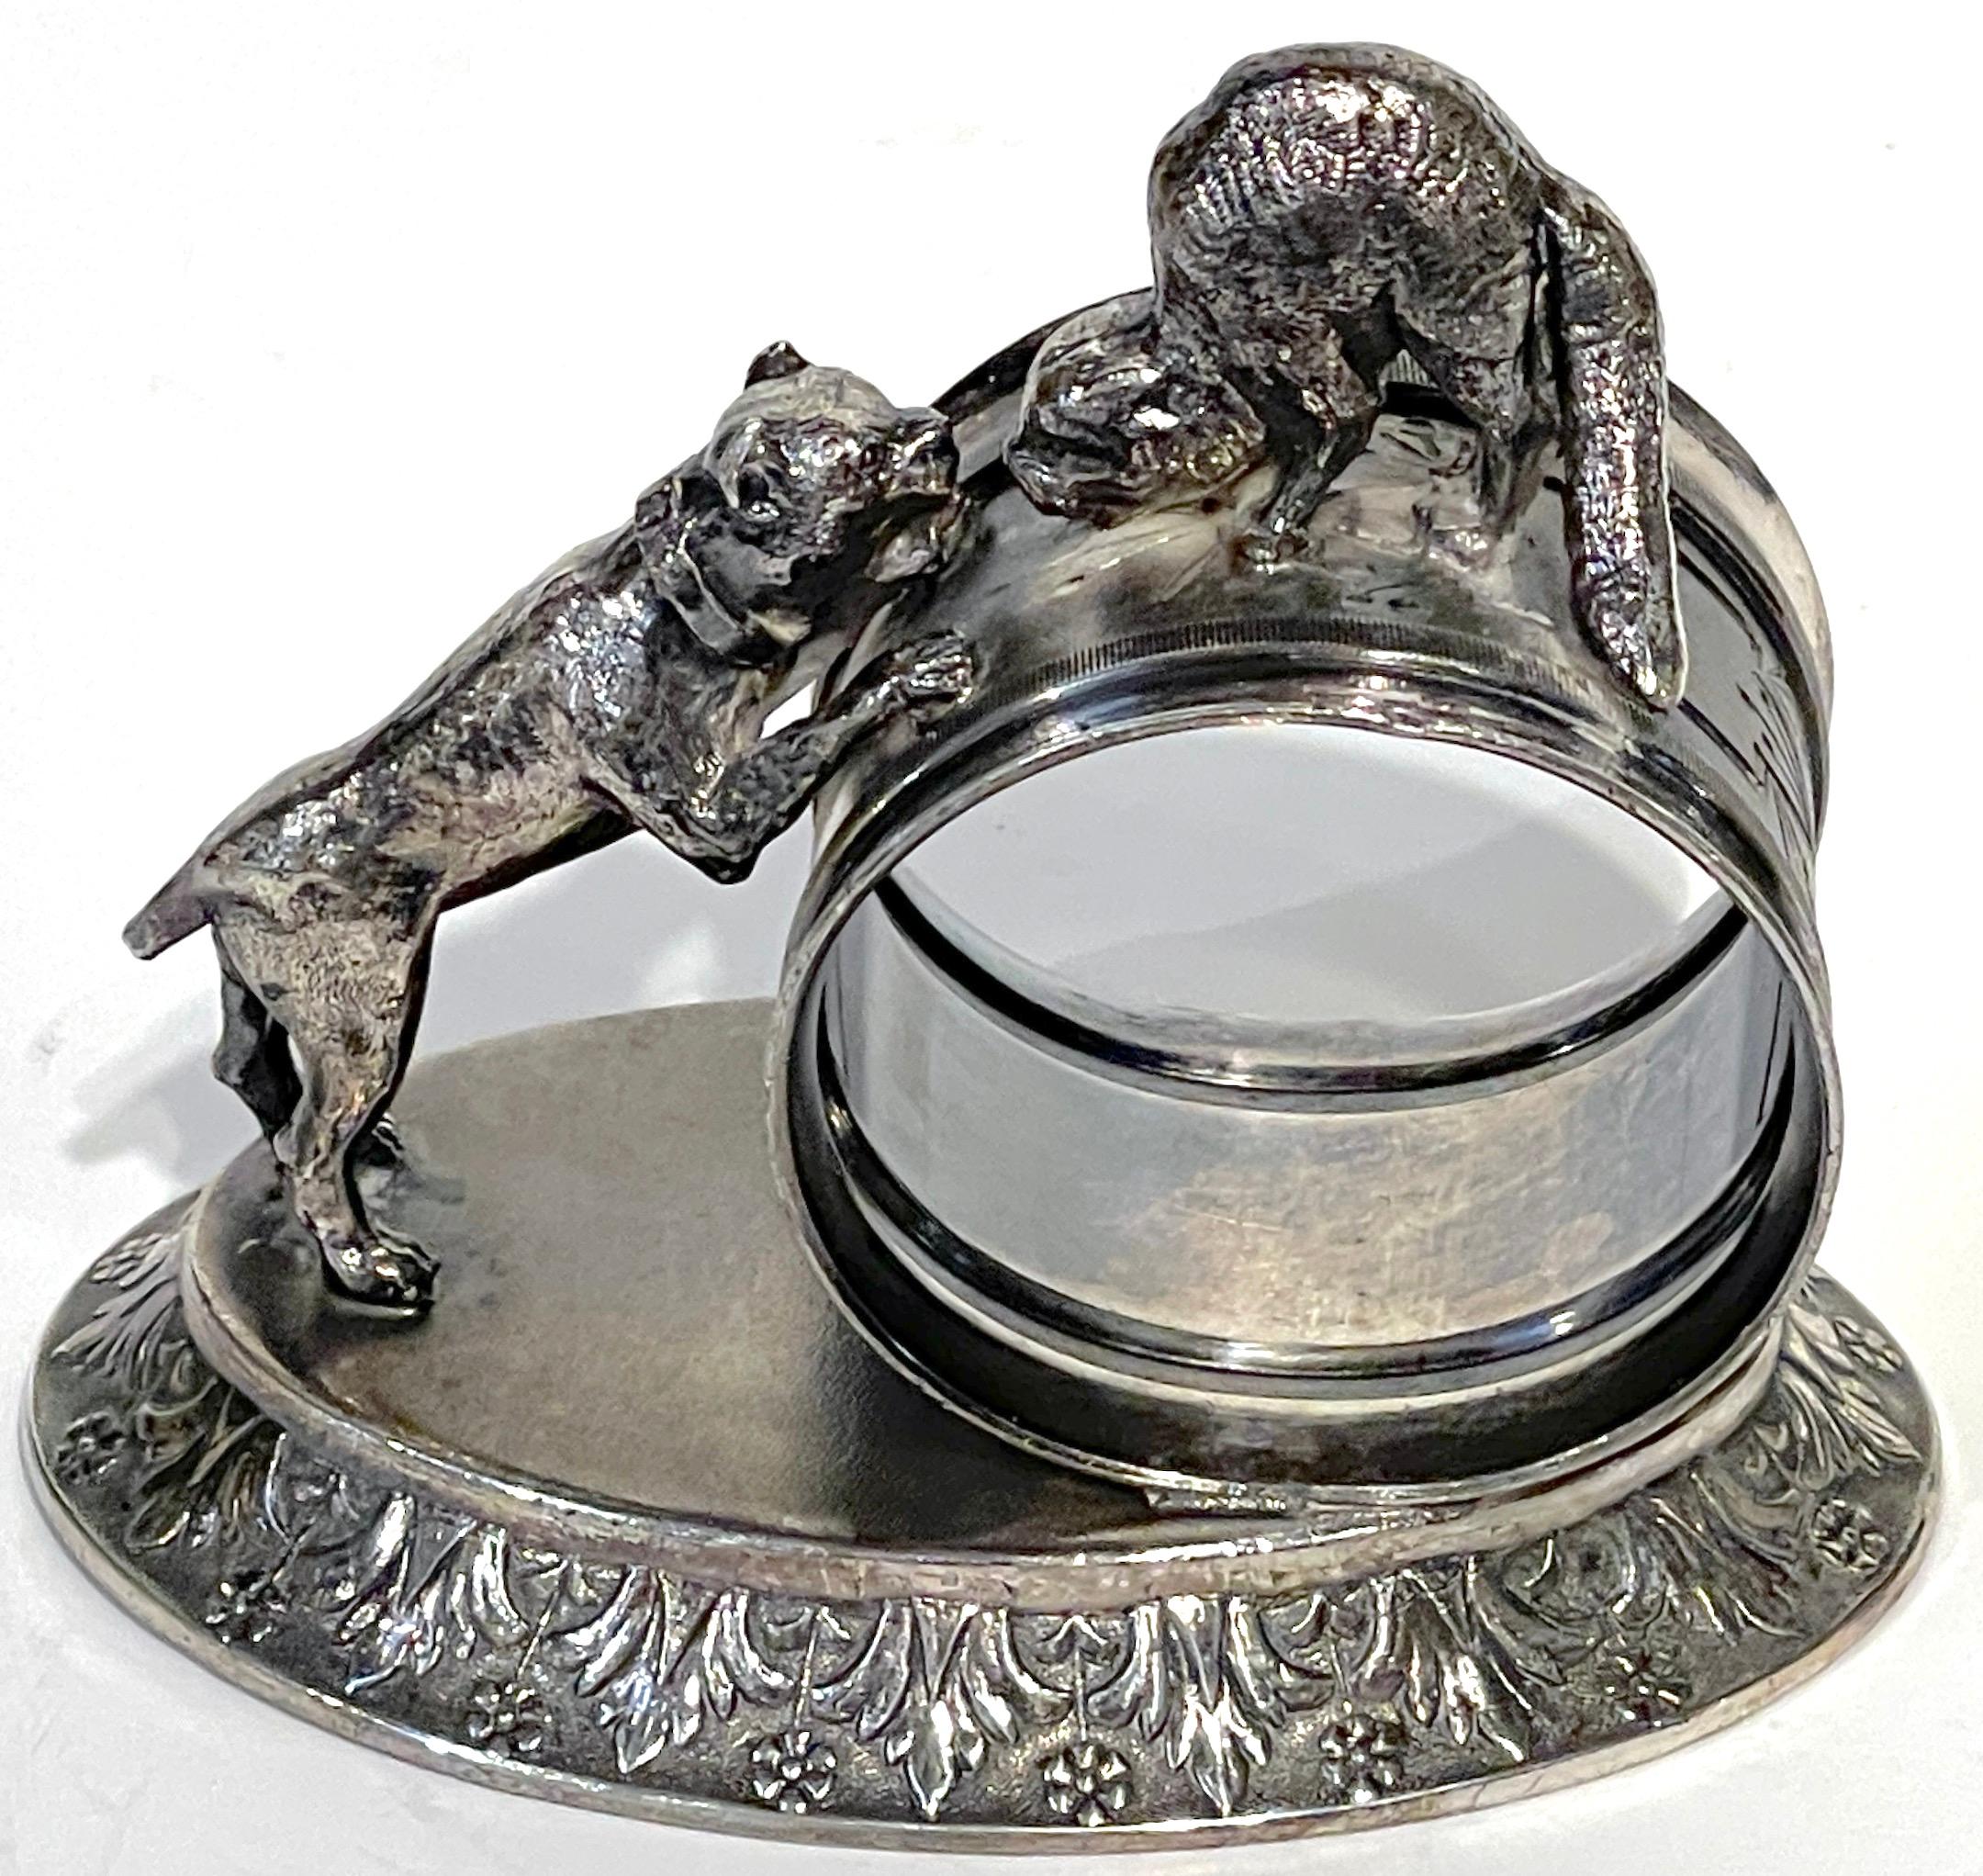 Meriden 'Dog and Cat' Silverplated Figural Napkin Ring
USA, Circa 1890

Offering an exquisite Meriden 'Dog and Cat' Silverplated Figural Napkin Ring from the USA, circa 1890. This charming piece portrays a dog standing on a 3.5 x 2.5 oval base, its